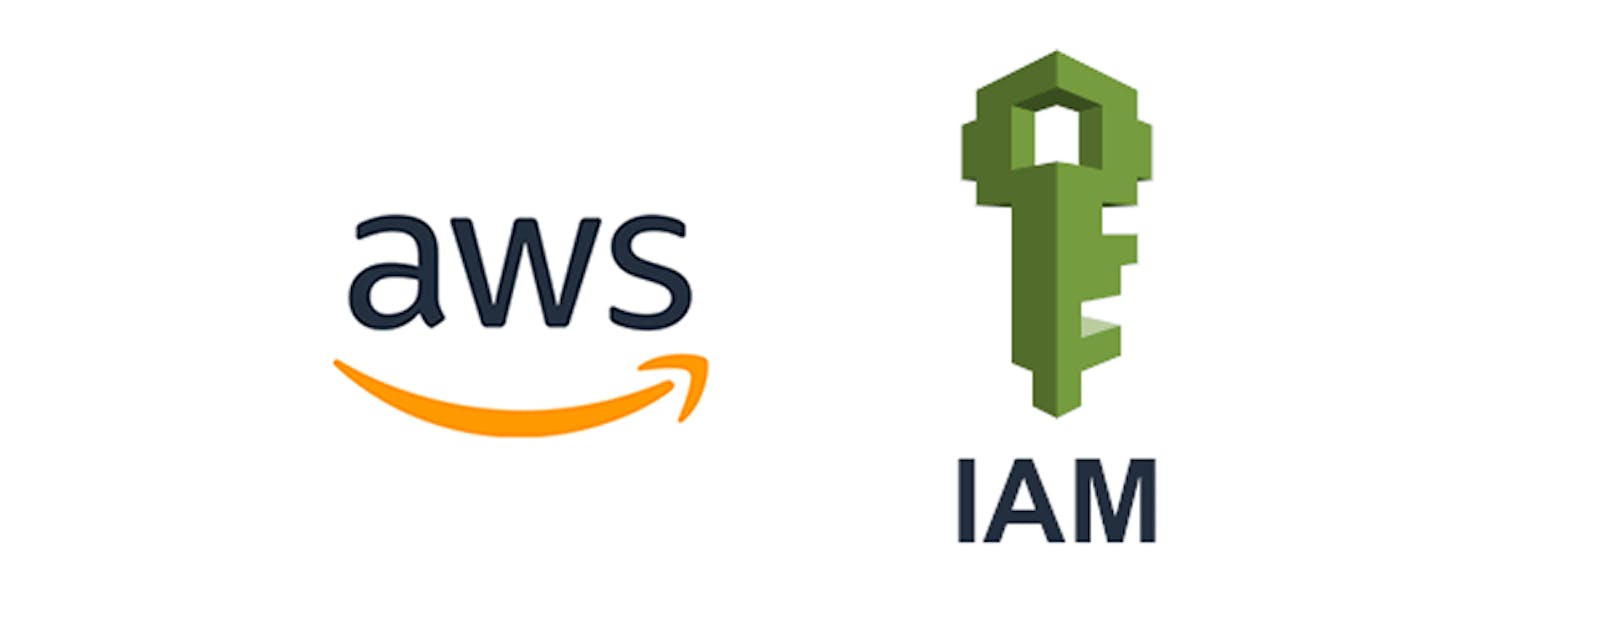 AWS IAM: Securely Control Access to AWS Resources with IAM